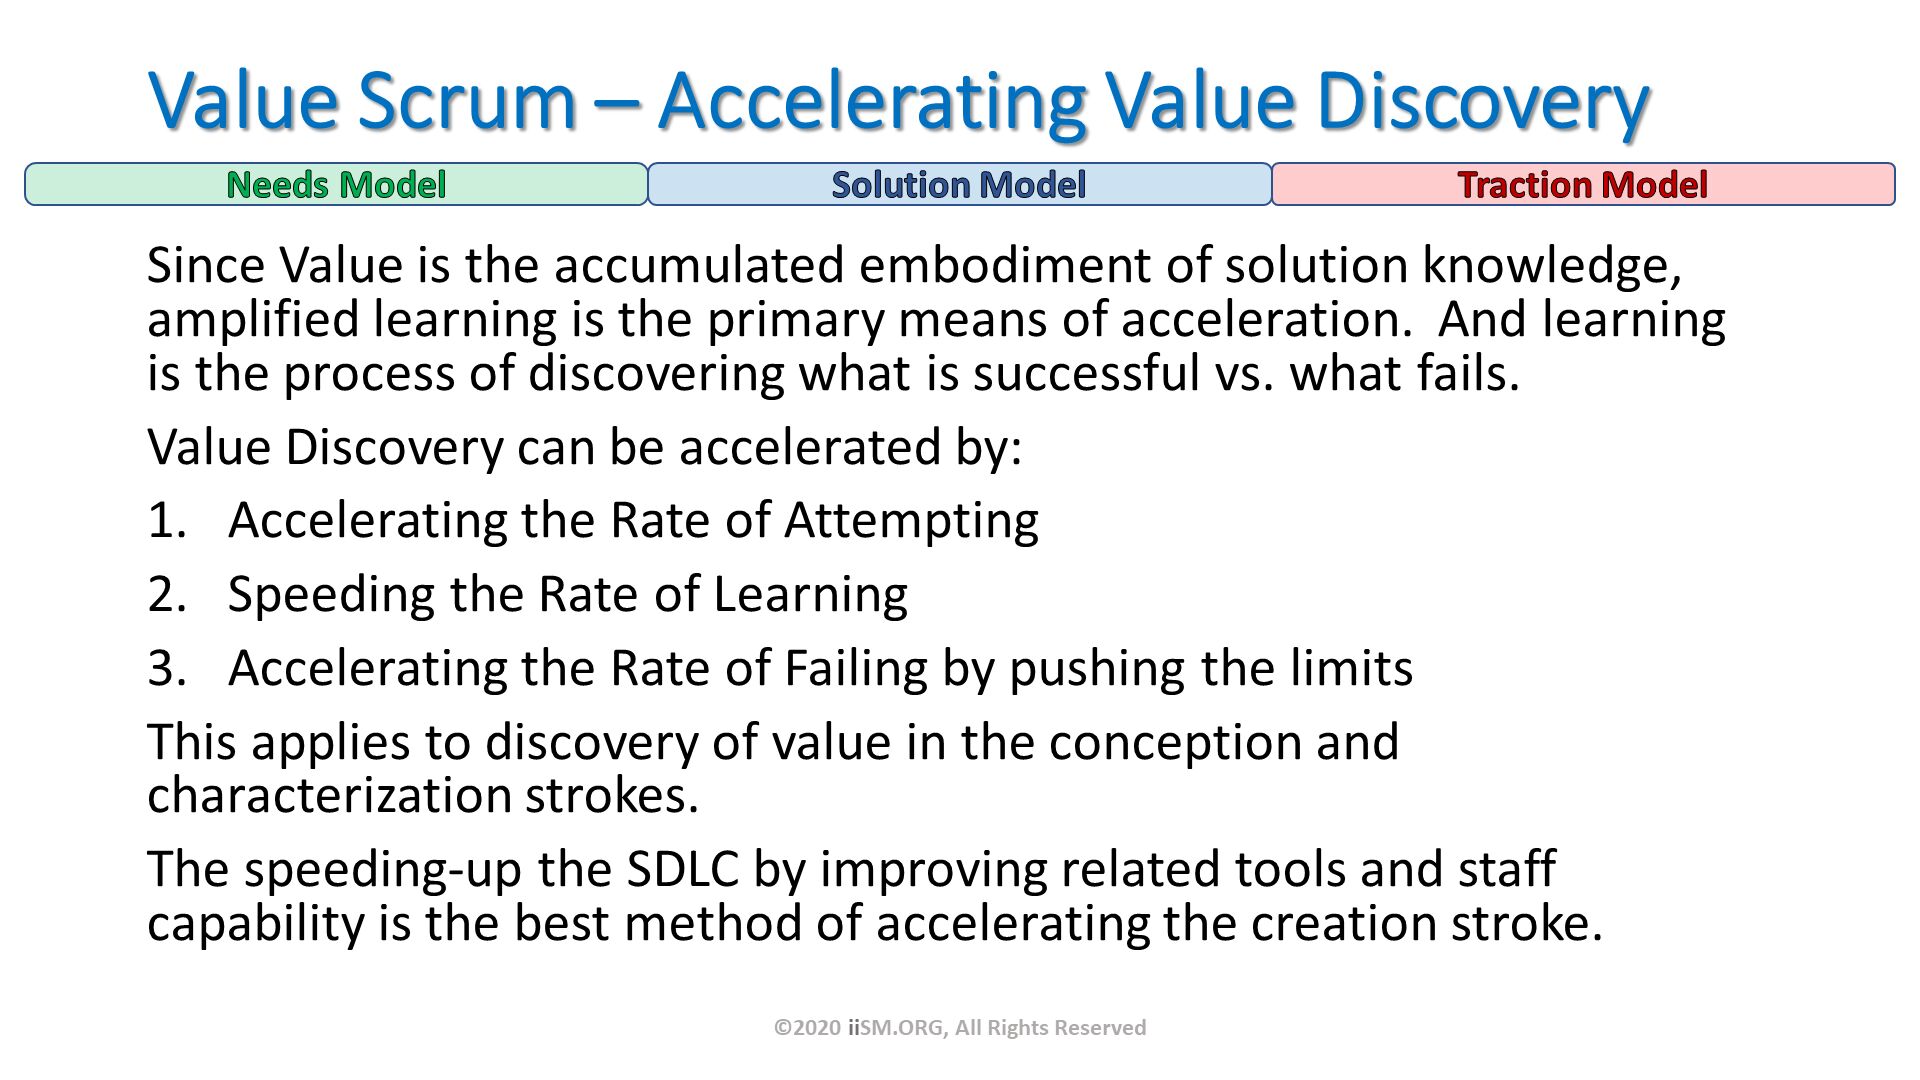 Since Value is the accumulated embodiment of solution knowledge, amplified learning is the primary means of acceleration.  And learning is the process of discovering what is successful vs. what fails.
Value Discovery can be accelerated by:
Accelerating the Rate of Attempting 
Speeding the Rate of Learning
Accelerating the Rate of Failing by pushing the limits
This applies to discovery of value in the conception and characterization strokes.  
The speeding-up the SDLC by improving related tools and staff capability is the best method of accelerating the creation stroke. Value Scrum – Accelerating Value Discovery. ©2020 iiSM.ORG, All Rights Reserved. 